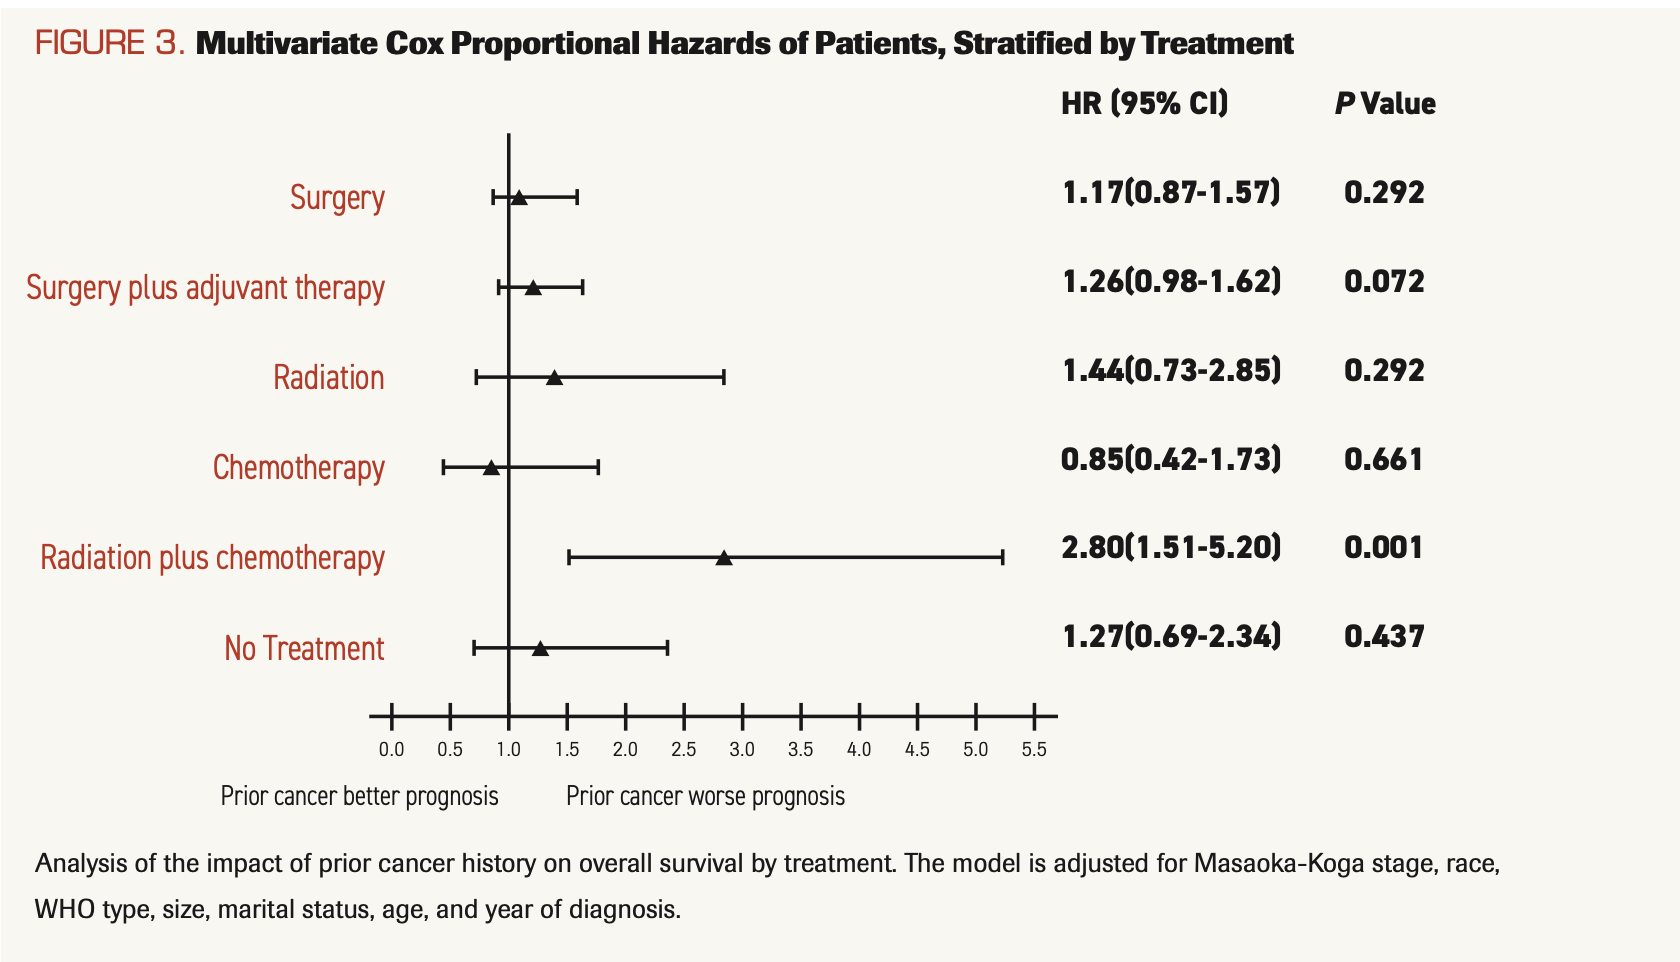 FIGURE 3. Multivariate Cox Proportional Hazards of Patients, Stratified by Treatment